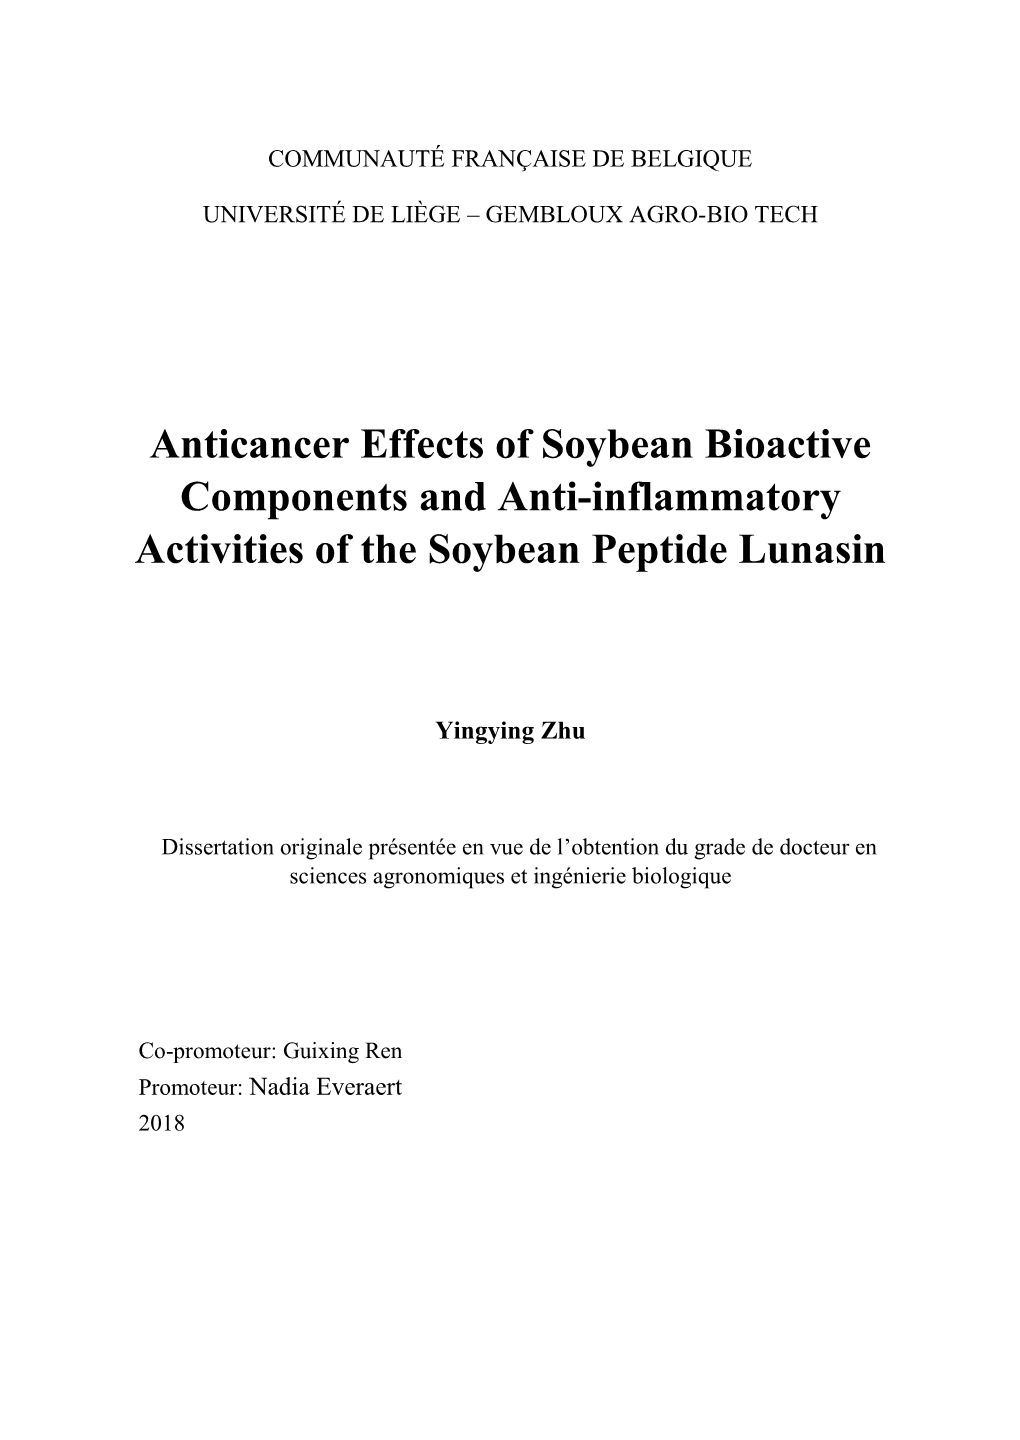 Anticancer Effects of Soybean Bioactive Components and Anti-Inflammatory Activities of the Soybean Peptide Lunasin